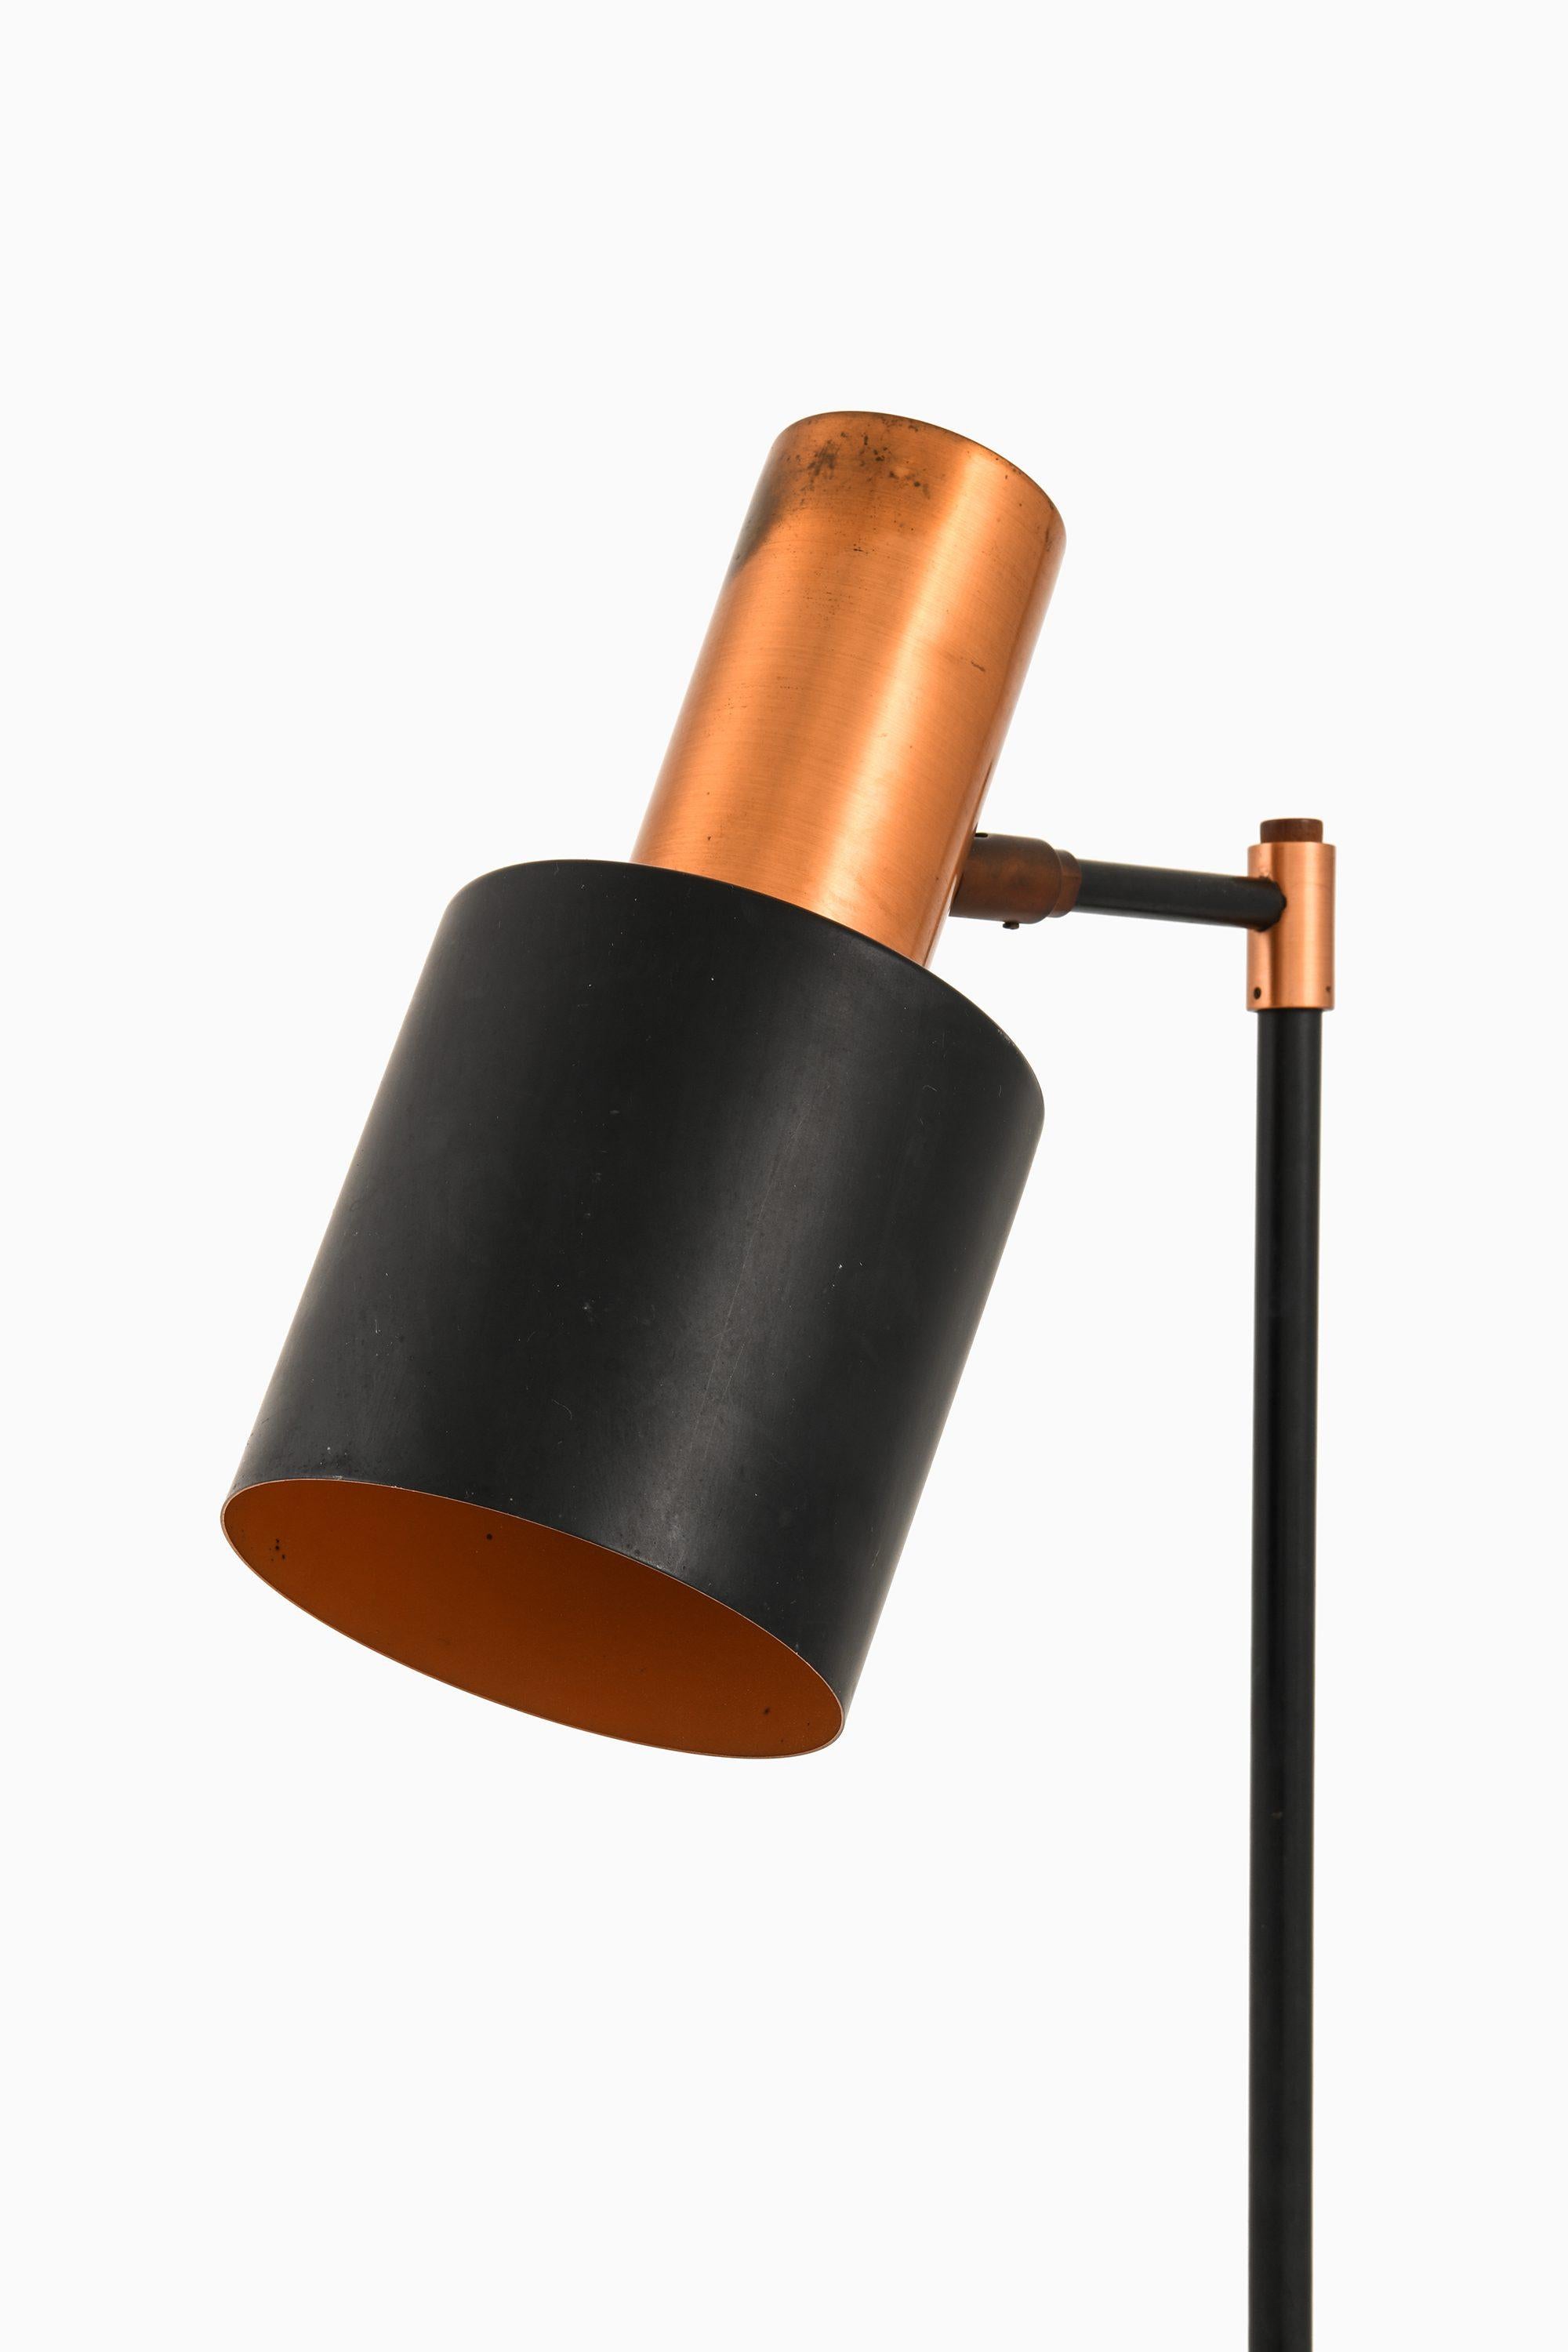 Floor Lamp in Black Lacquered Metal, Copper and Teak by Jo Hammerborg, 1950's

Additional Information:
Material: Black lacquered metal, copper, teak
Style: Mid century, Scandinavian
Rare floor lamp model Studio
Produced by Fog & Mørup in